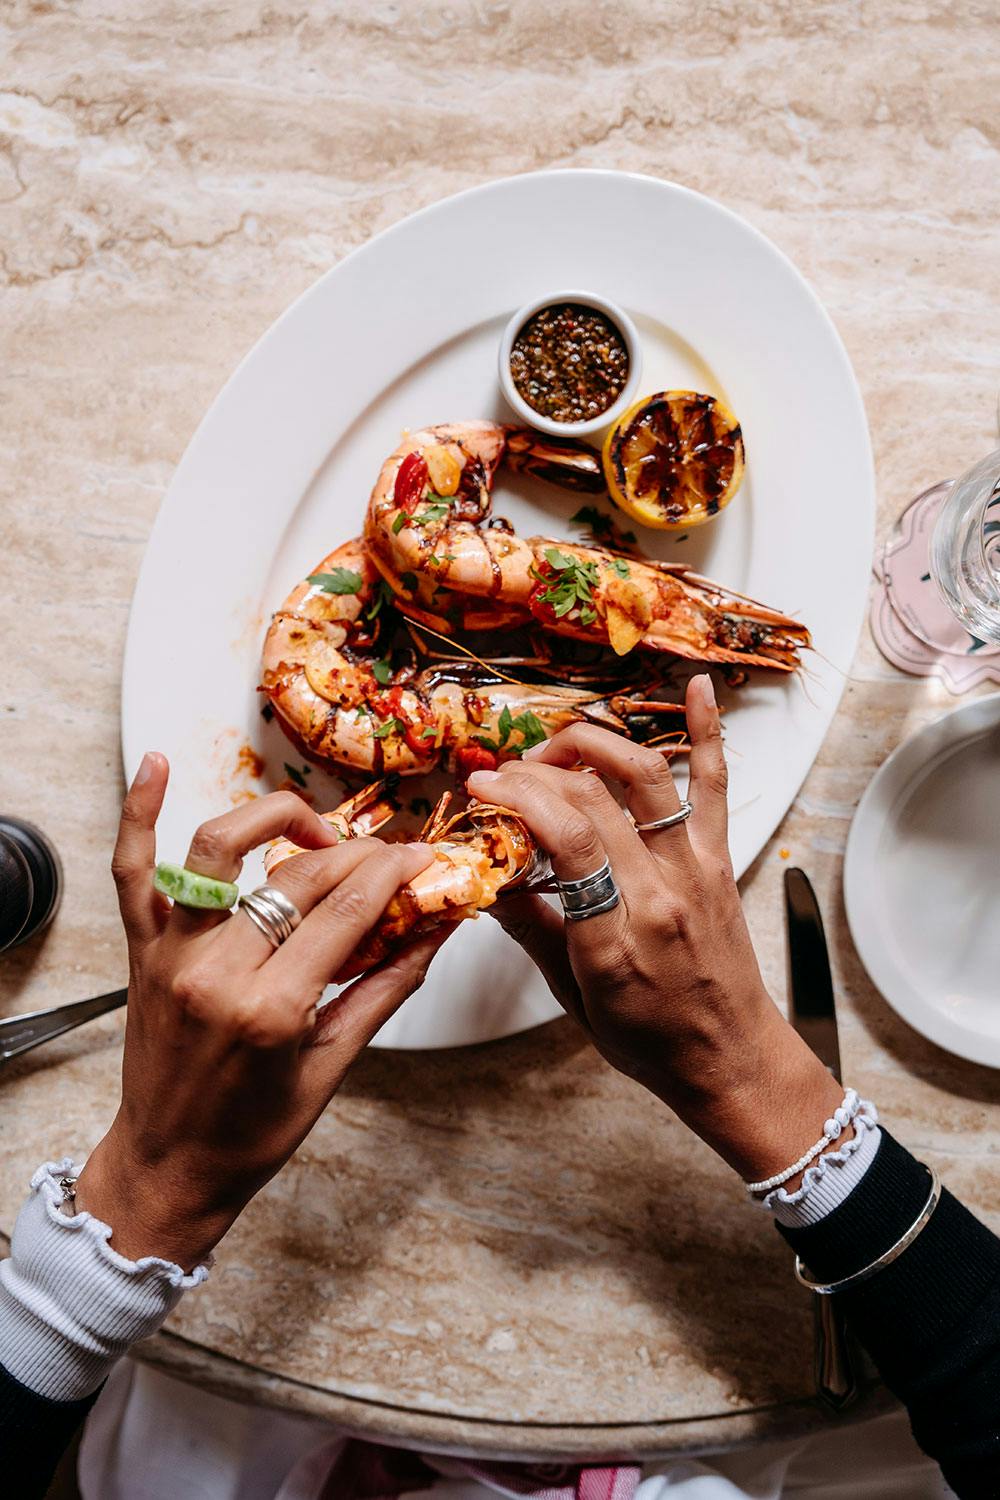 King prawns being shelled by two hands